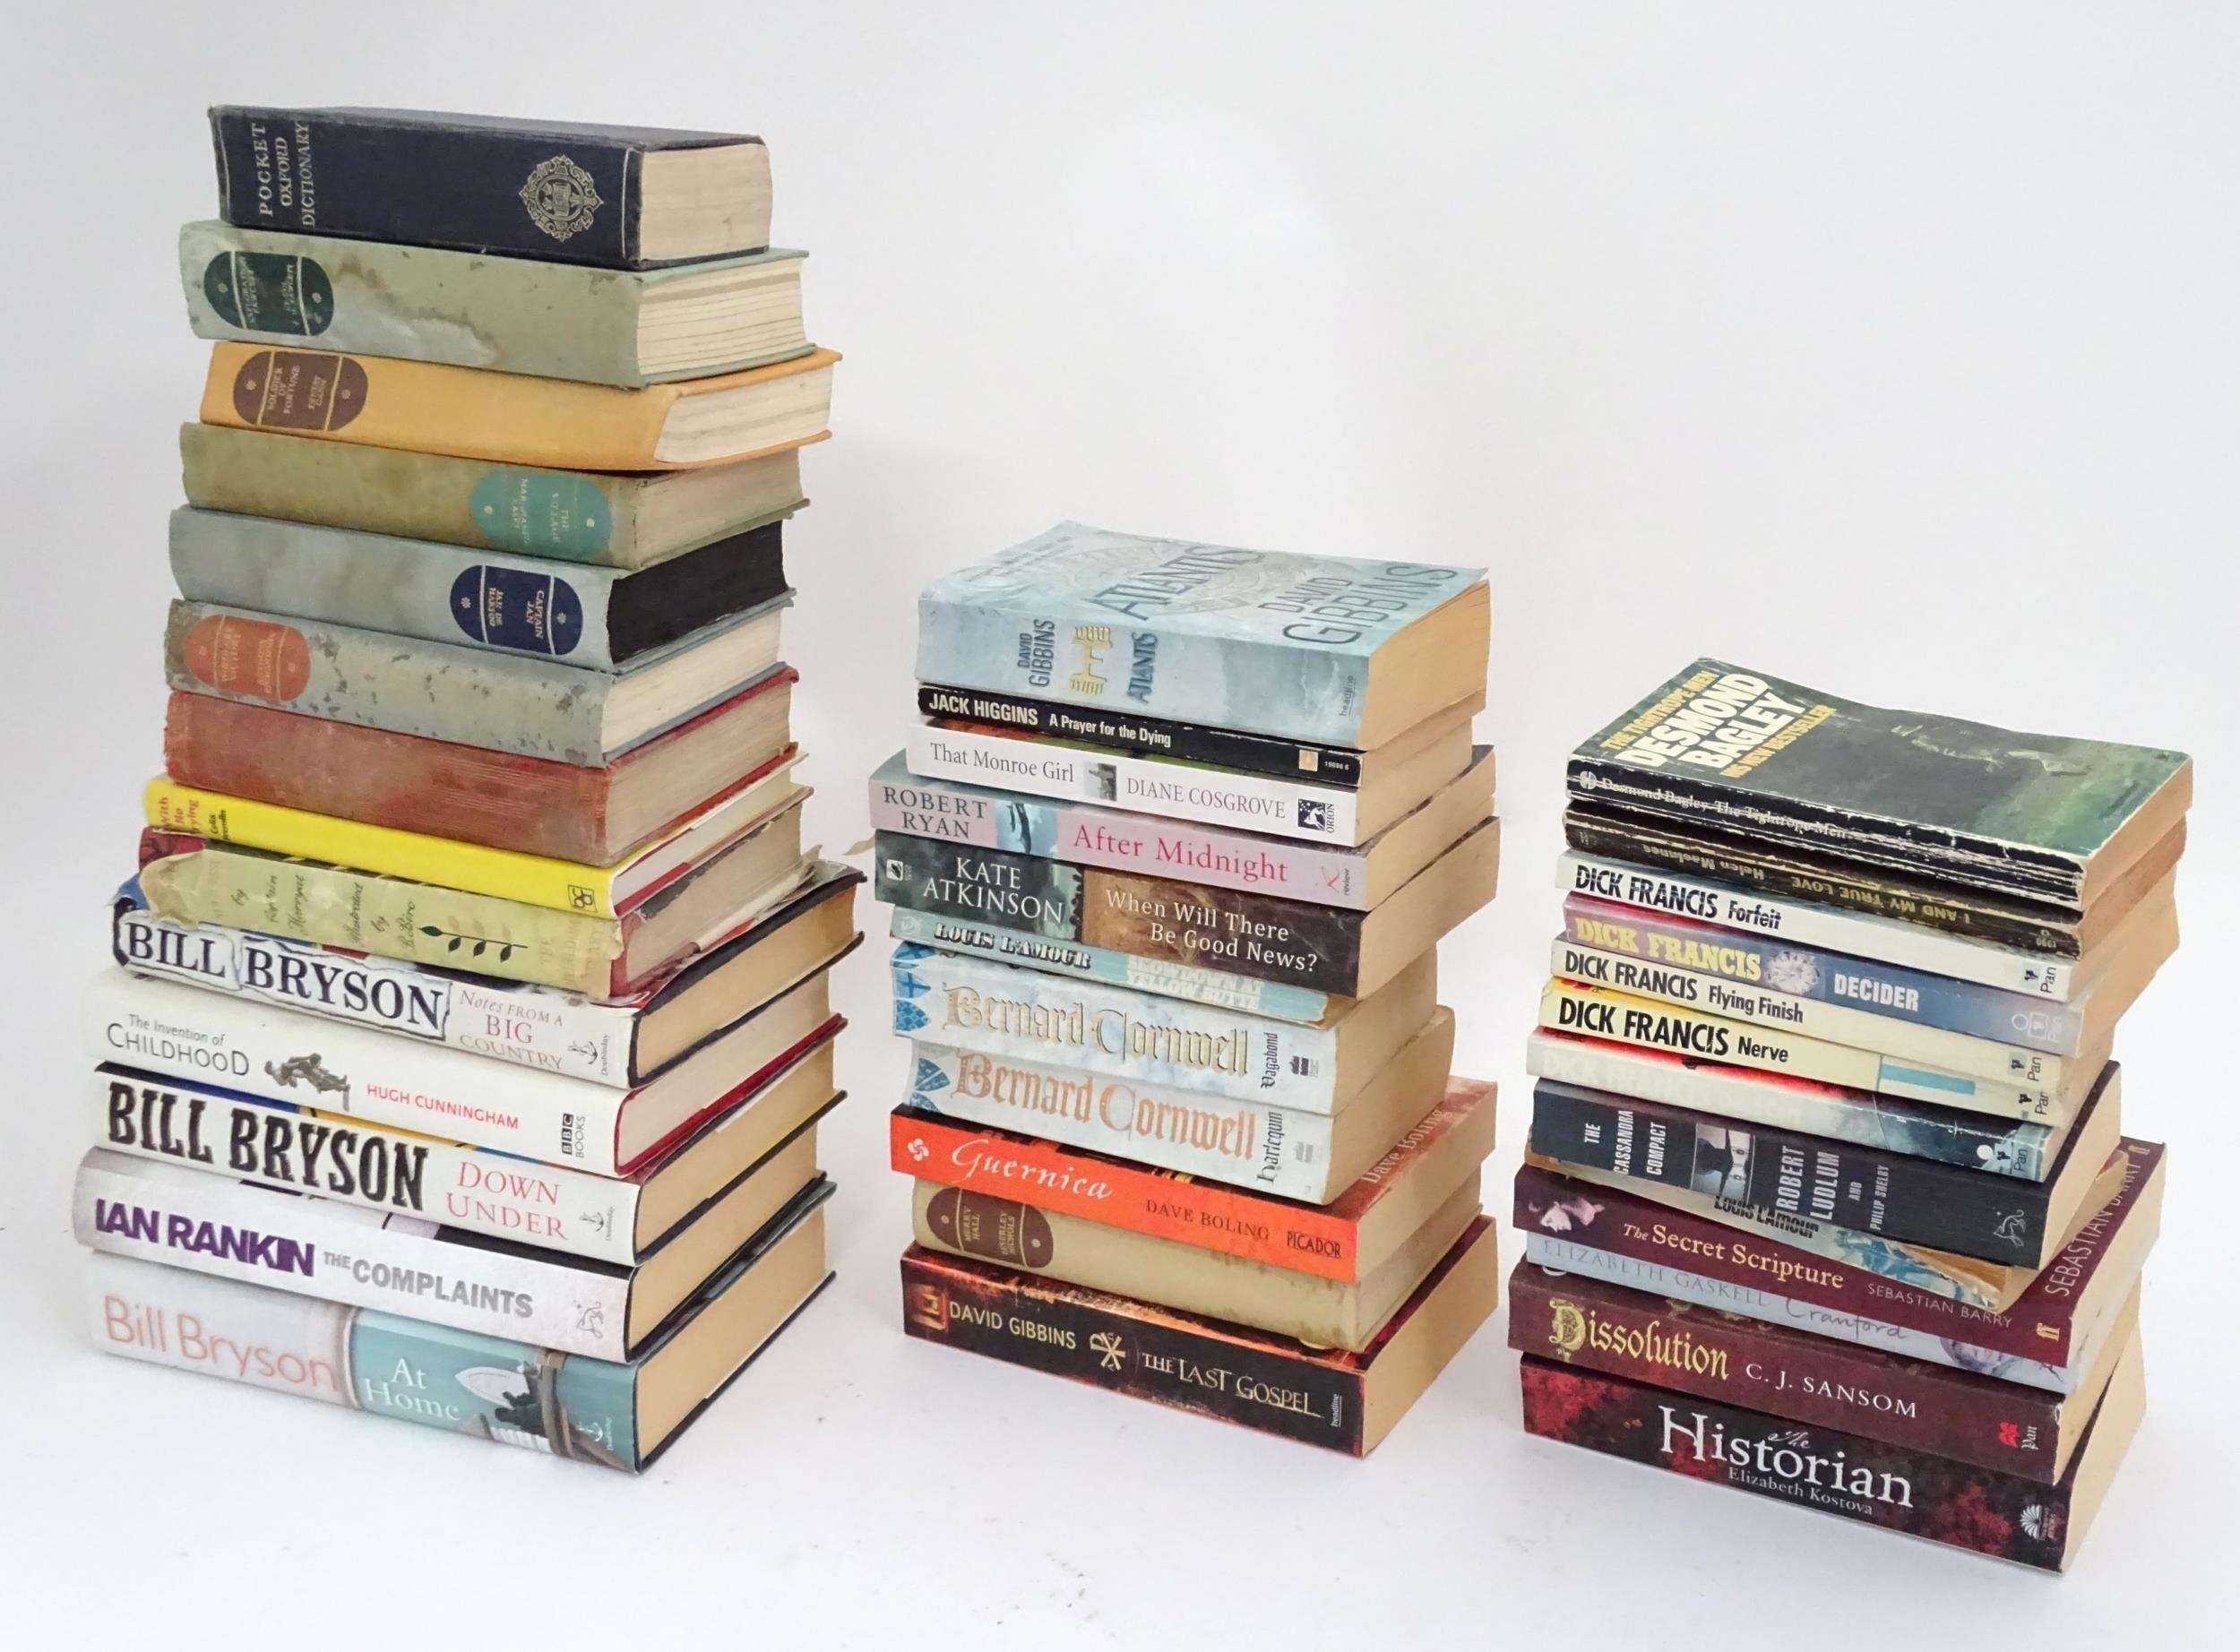 A quantity of assorted books to include titles by Bill Bryson, Hugh Cunningham, Ian Rankin etc.